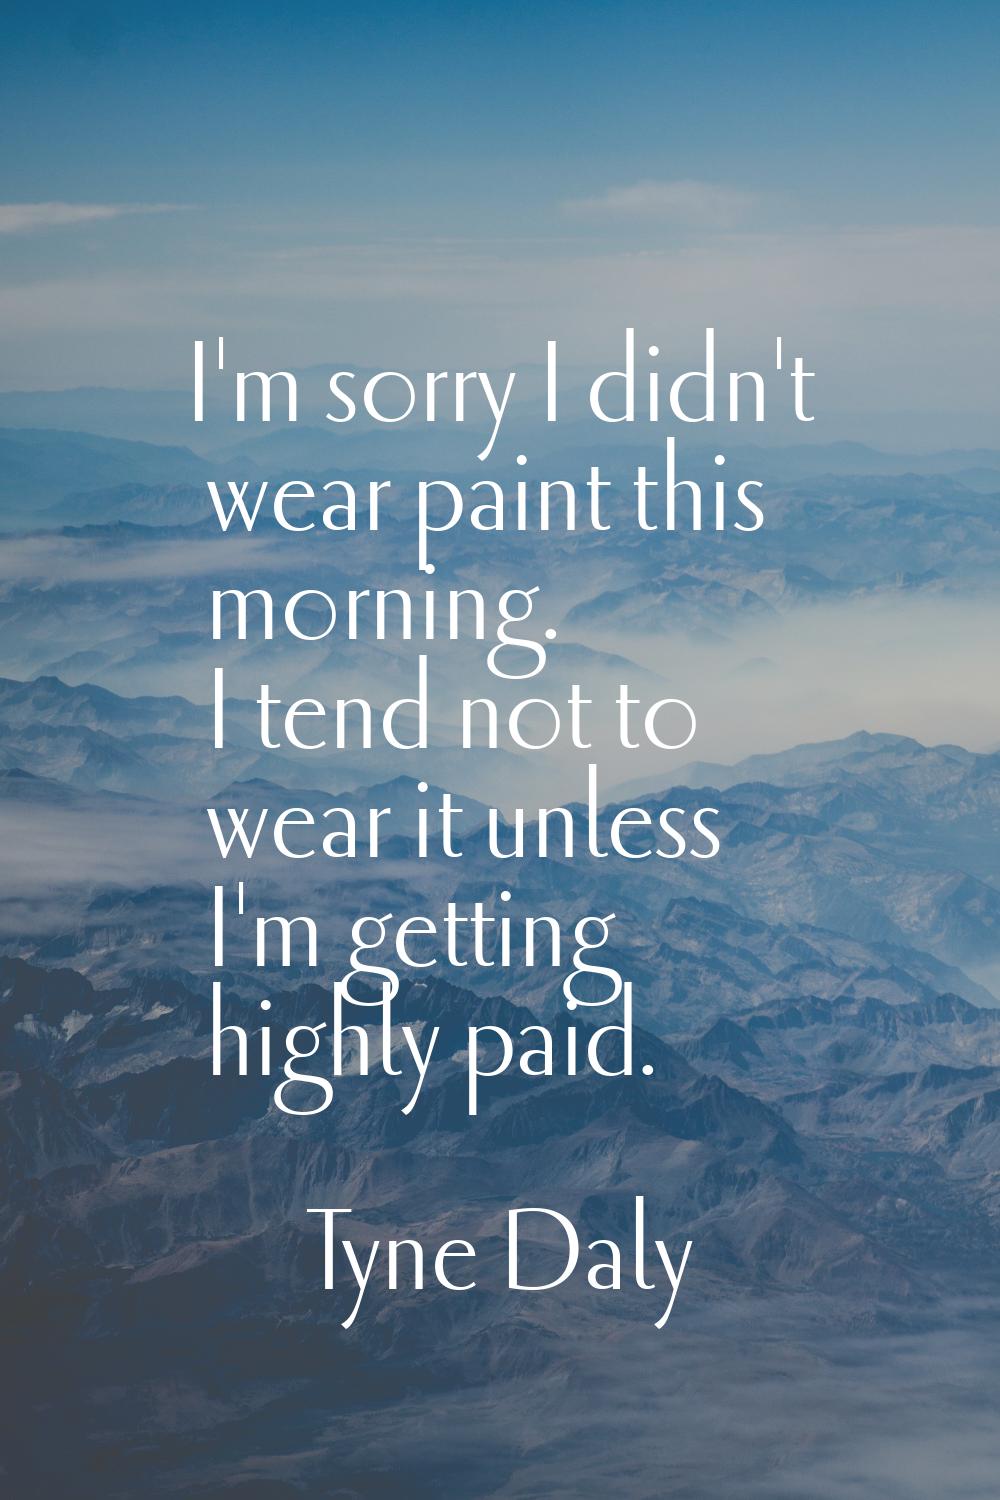 I'm sorry I didn't wear paint this morning. I tend not to wear it unless I'm getting highly paid.